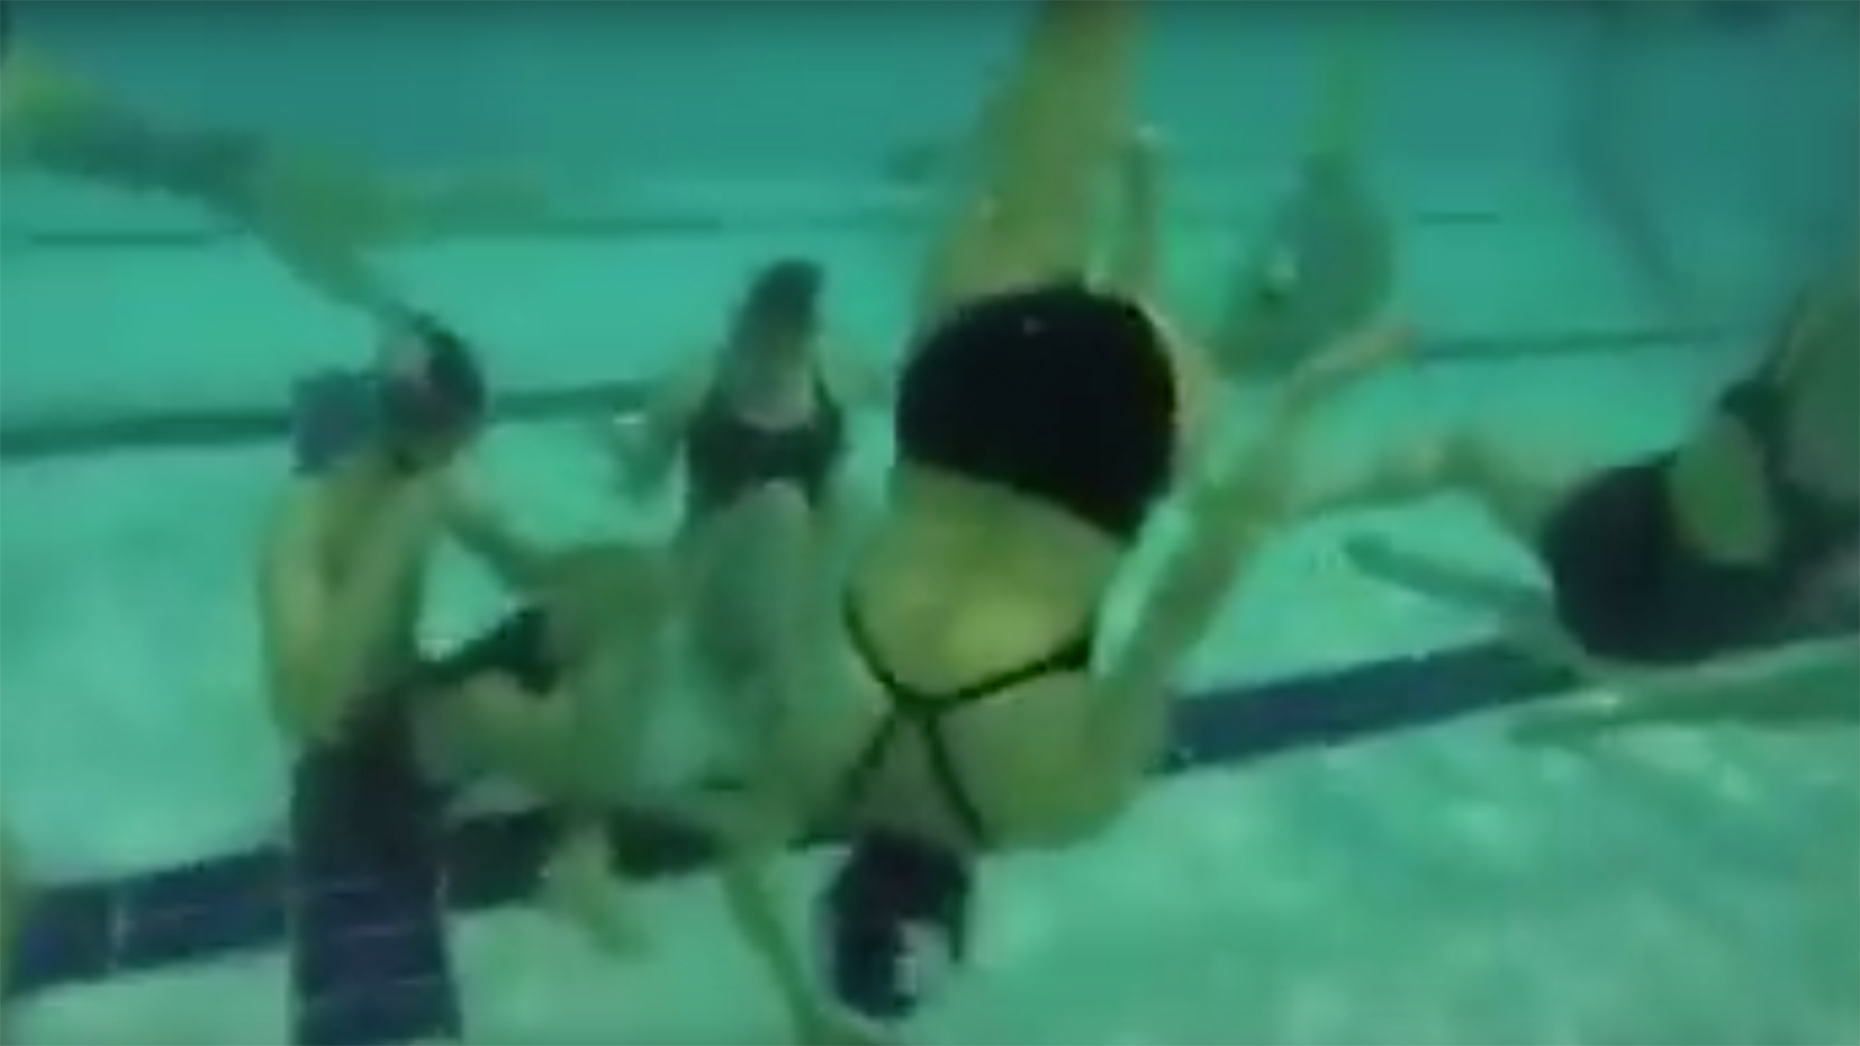 Impressive! One swimmer even managed to be upside down underwater as part of the challenge